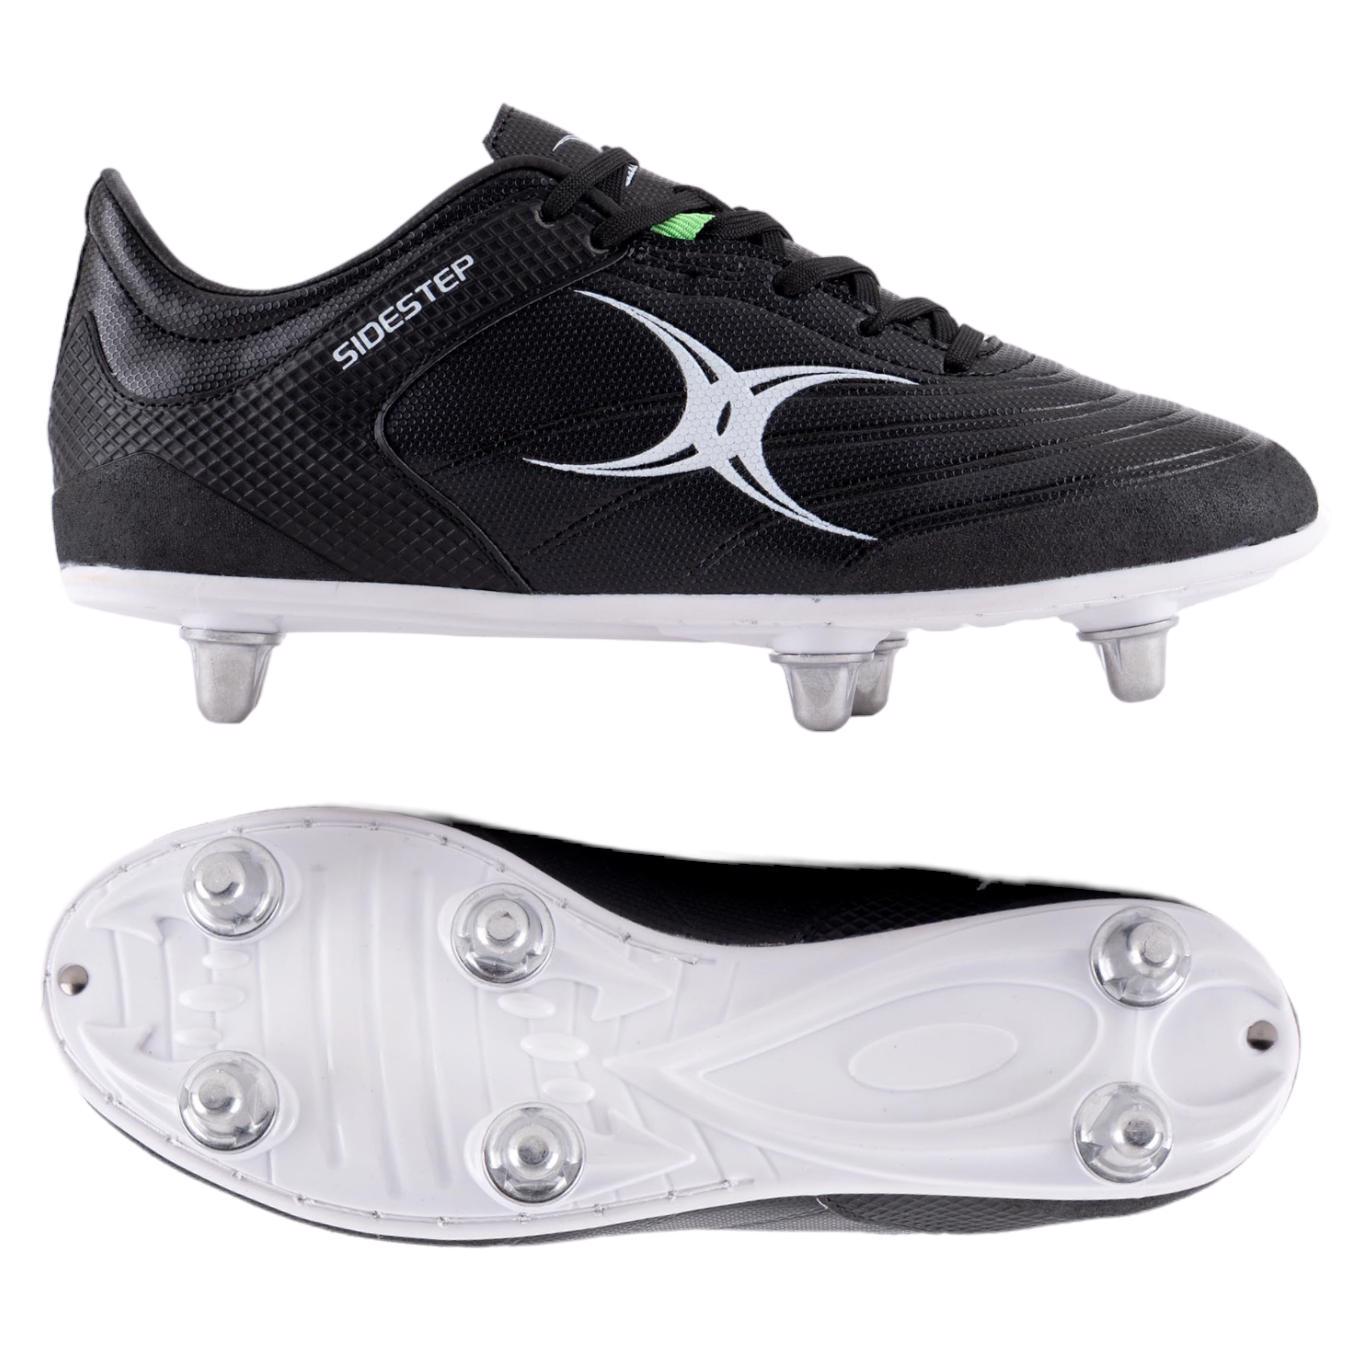 Gilbert Sidestep X15 LO 6S Rugby Boots BLACK, JUNIOR